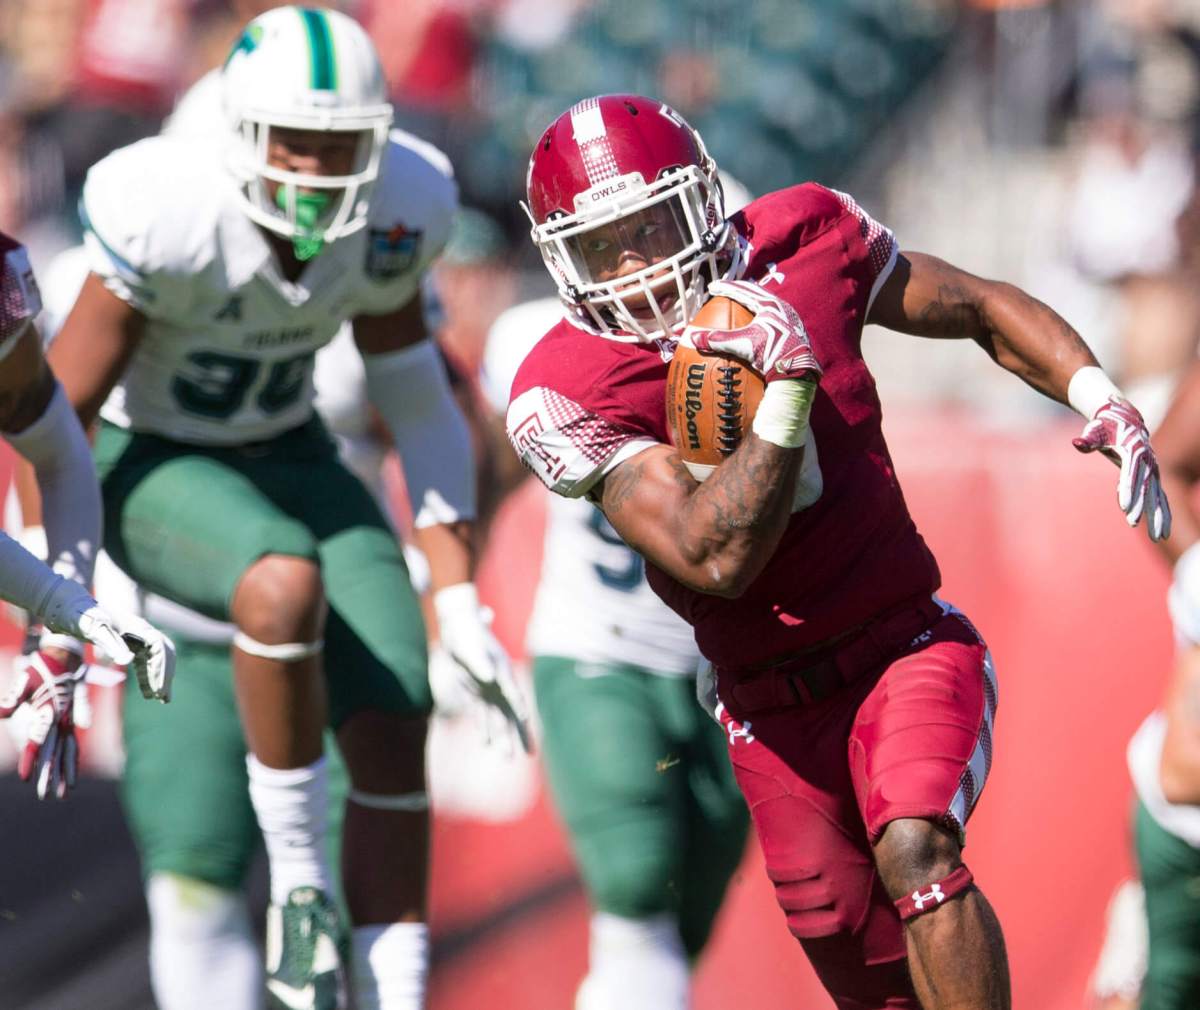 Nationally ranked Temple has new mentality, expects to win